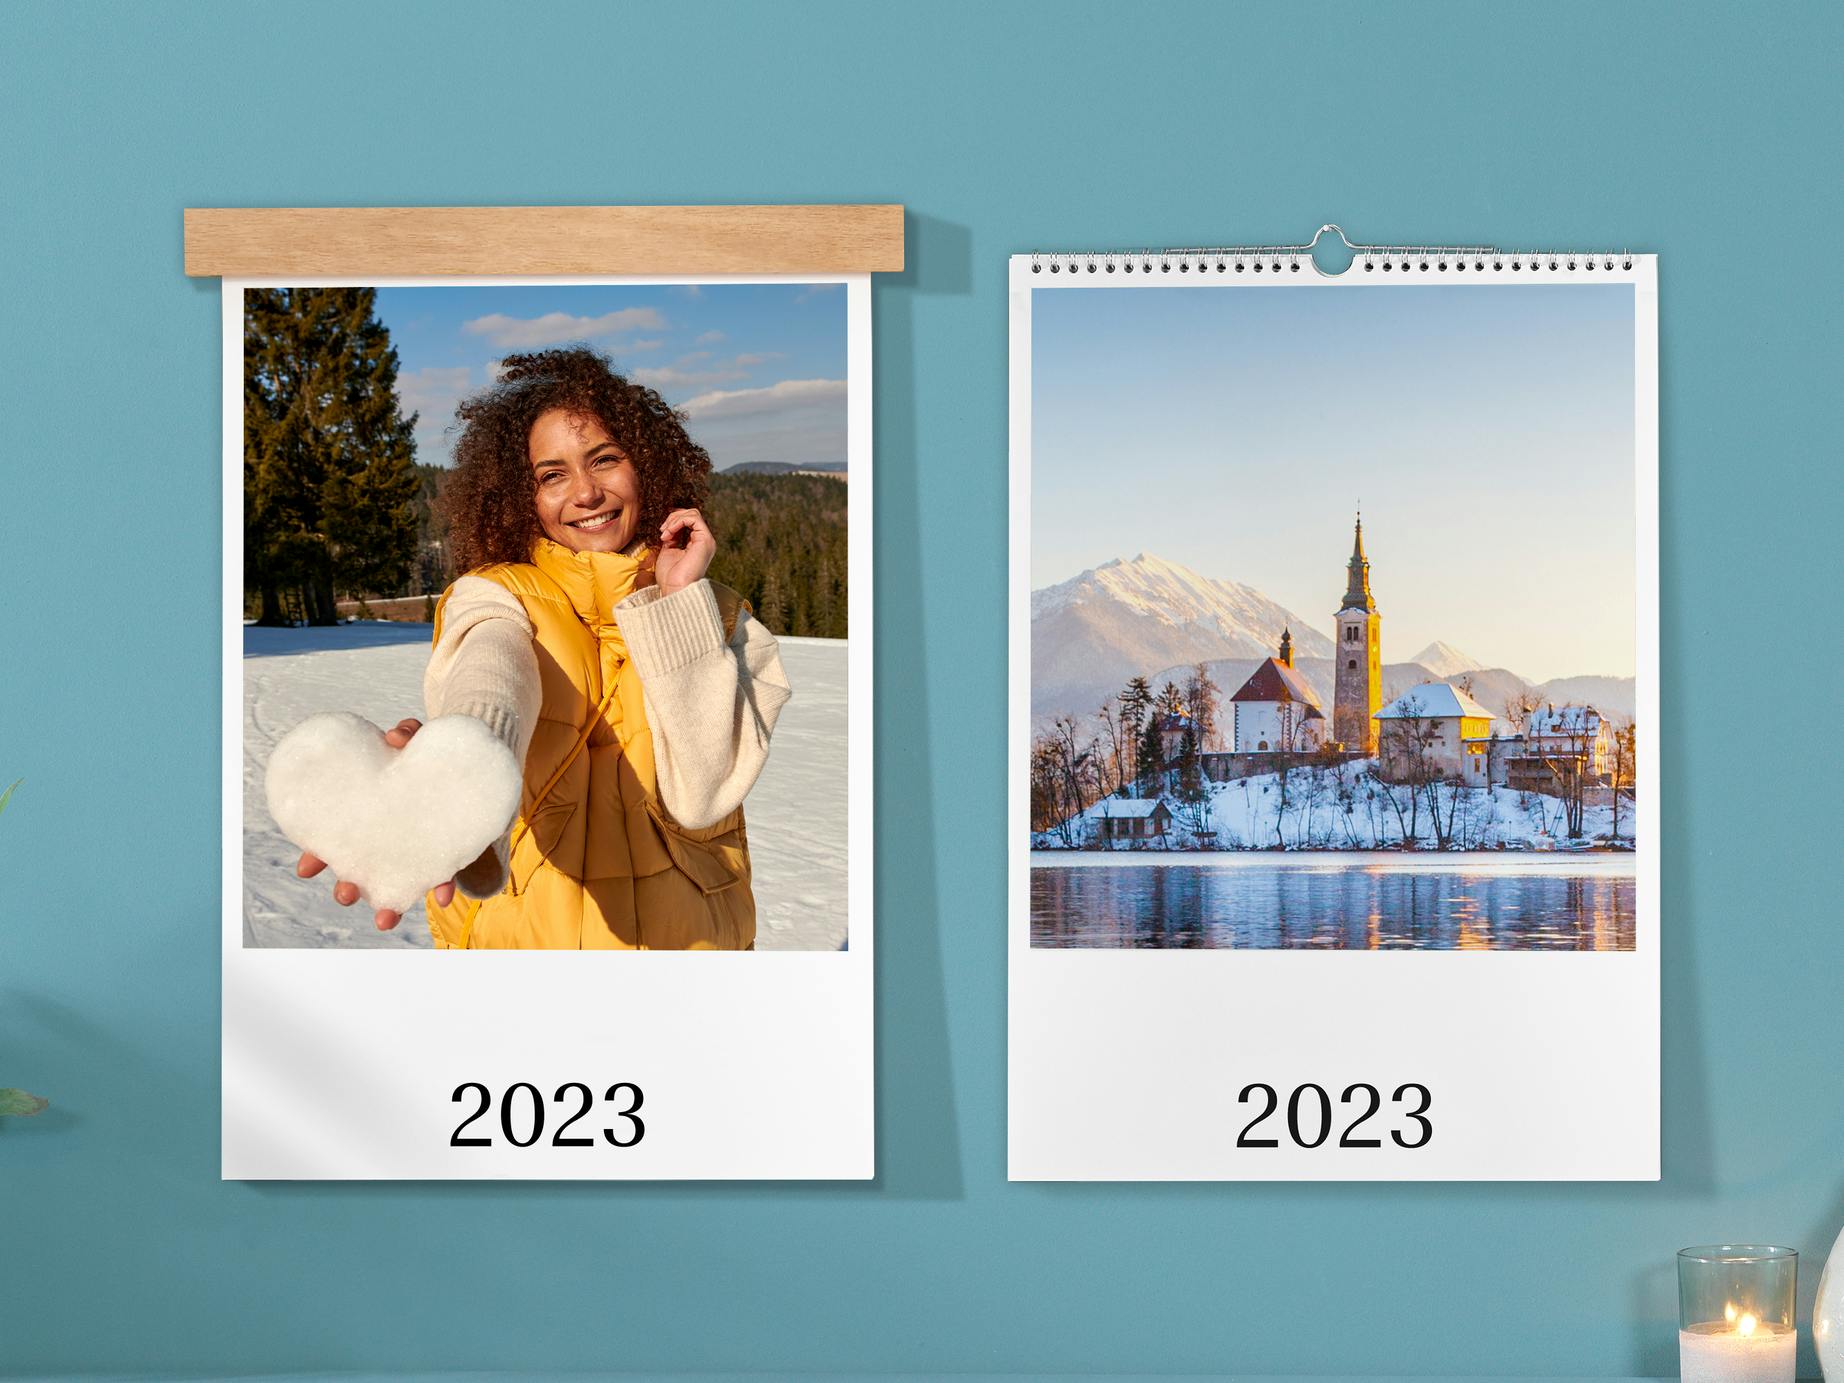 Two wall calendars in portrait format with a winter image on the cover